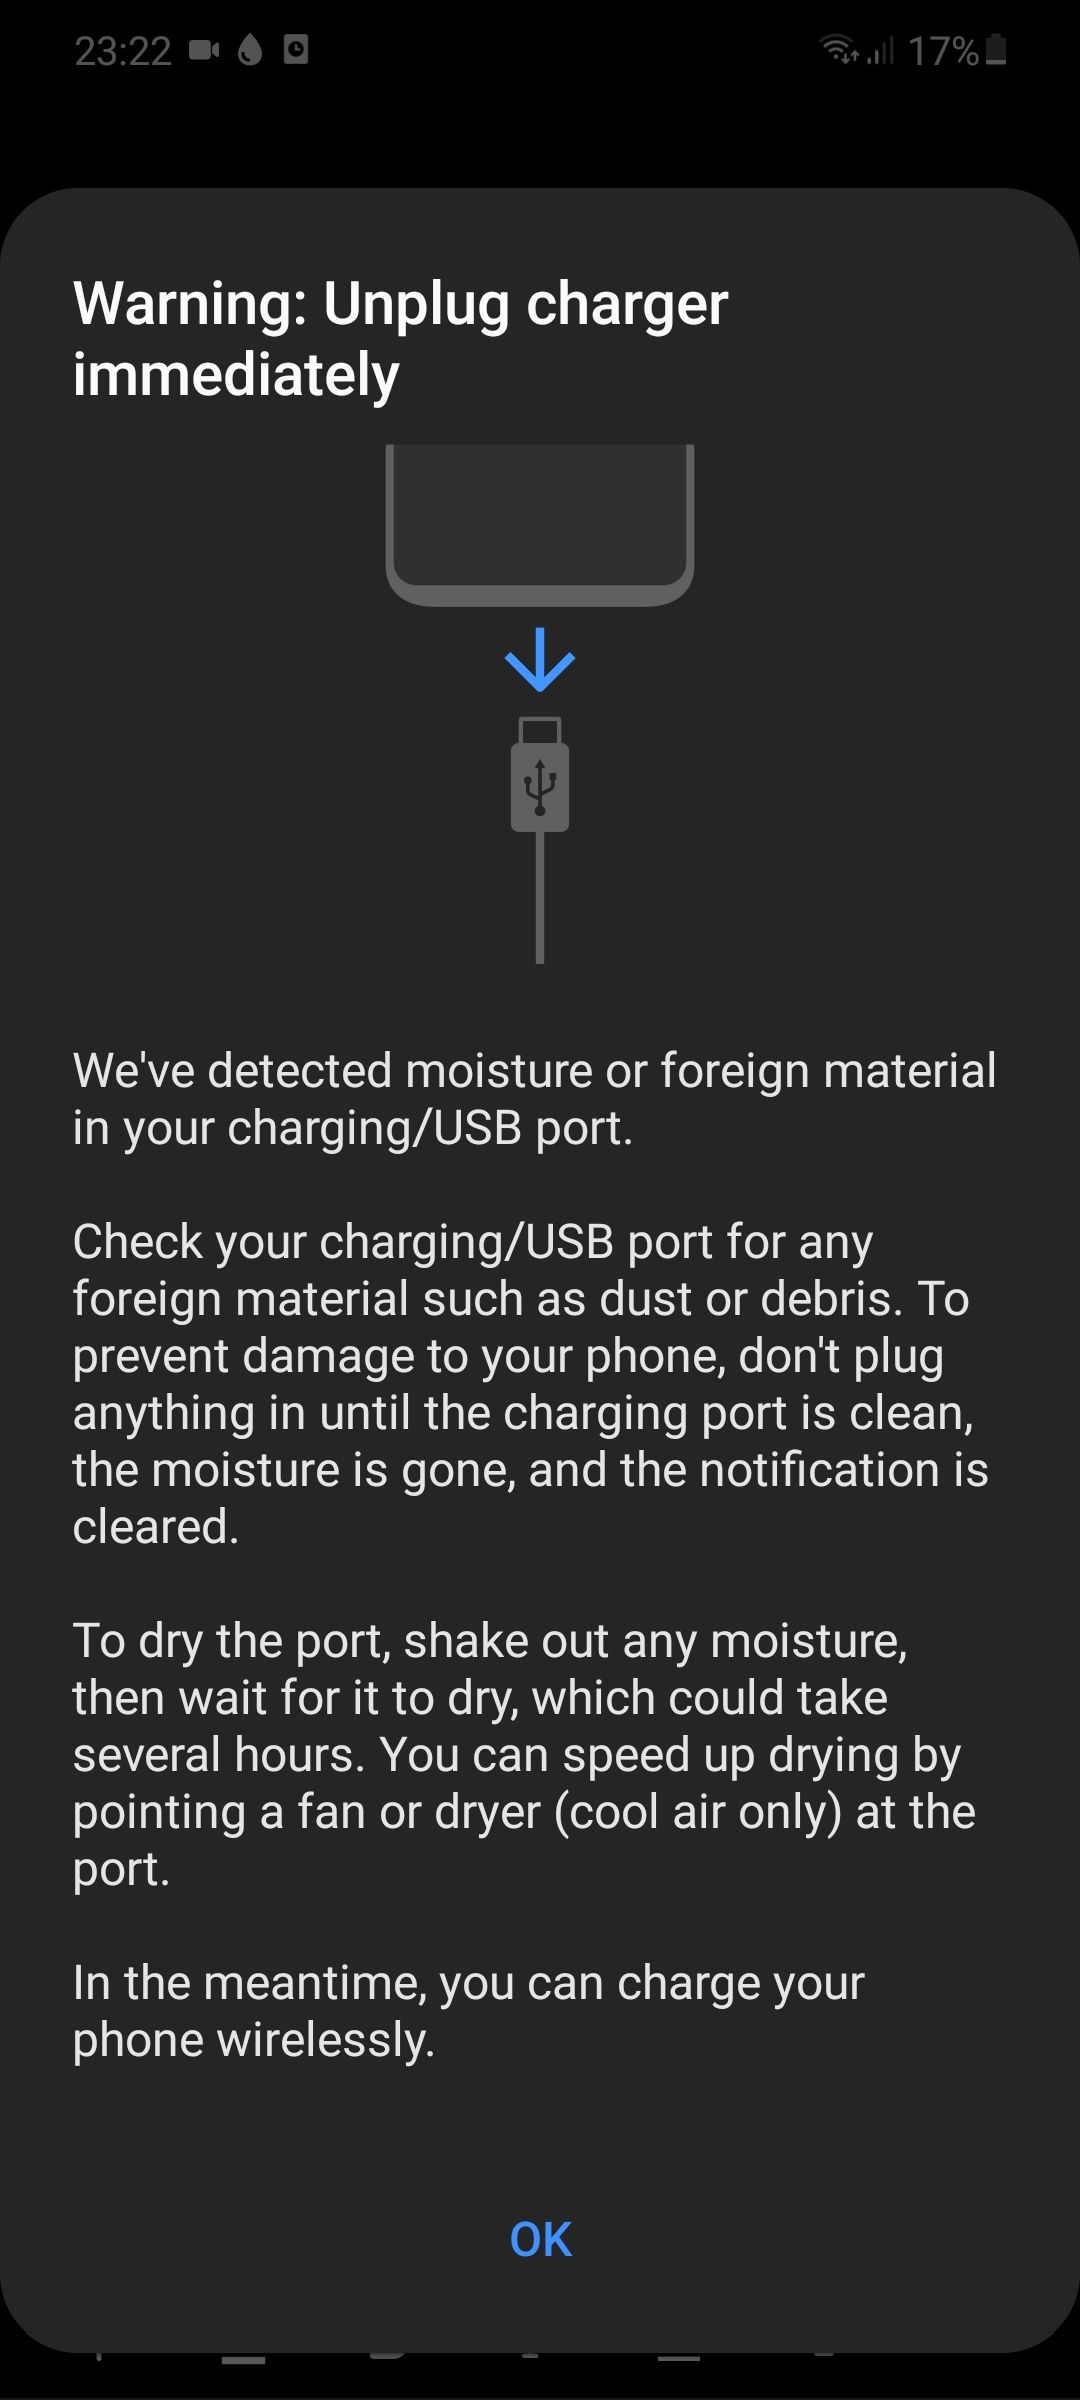 Warning of put letting me my phone - Samsung Community